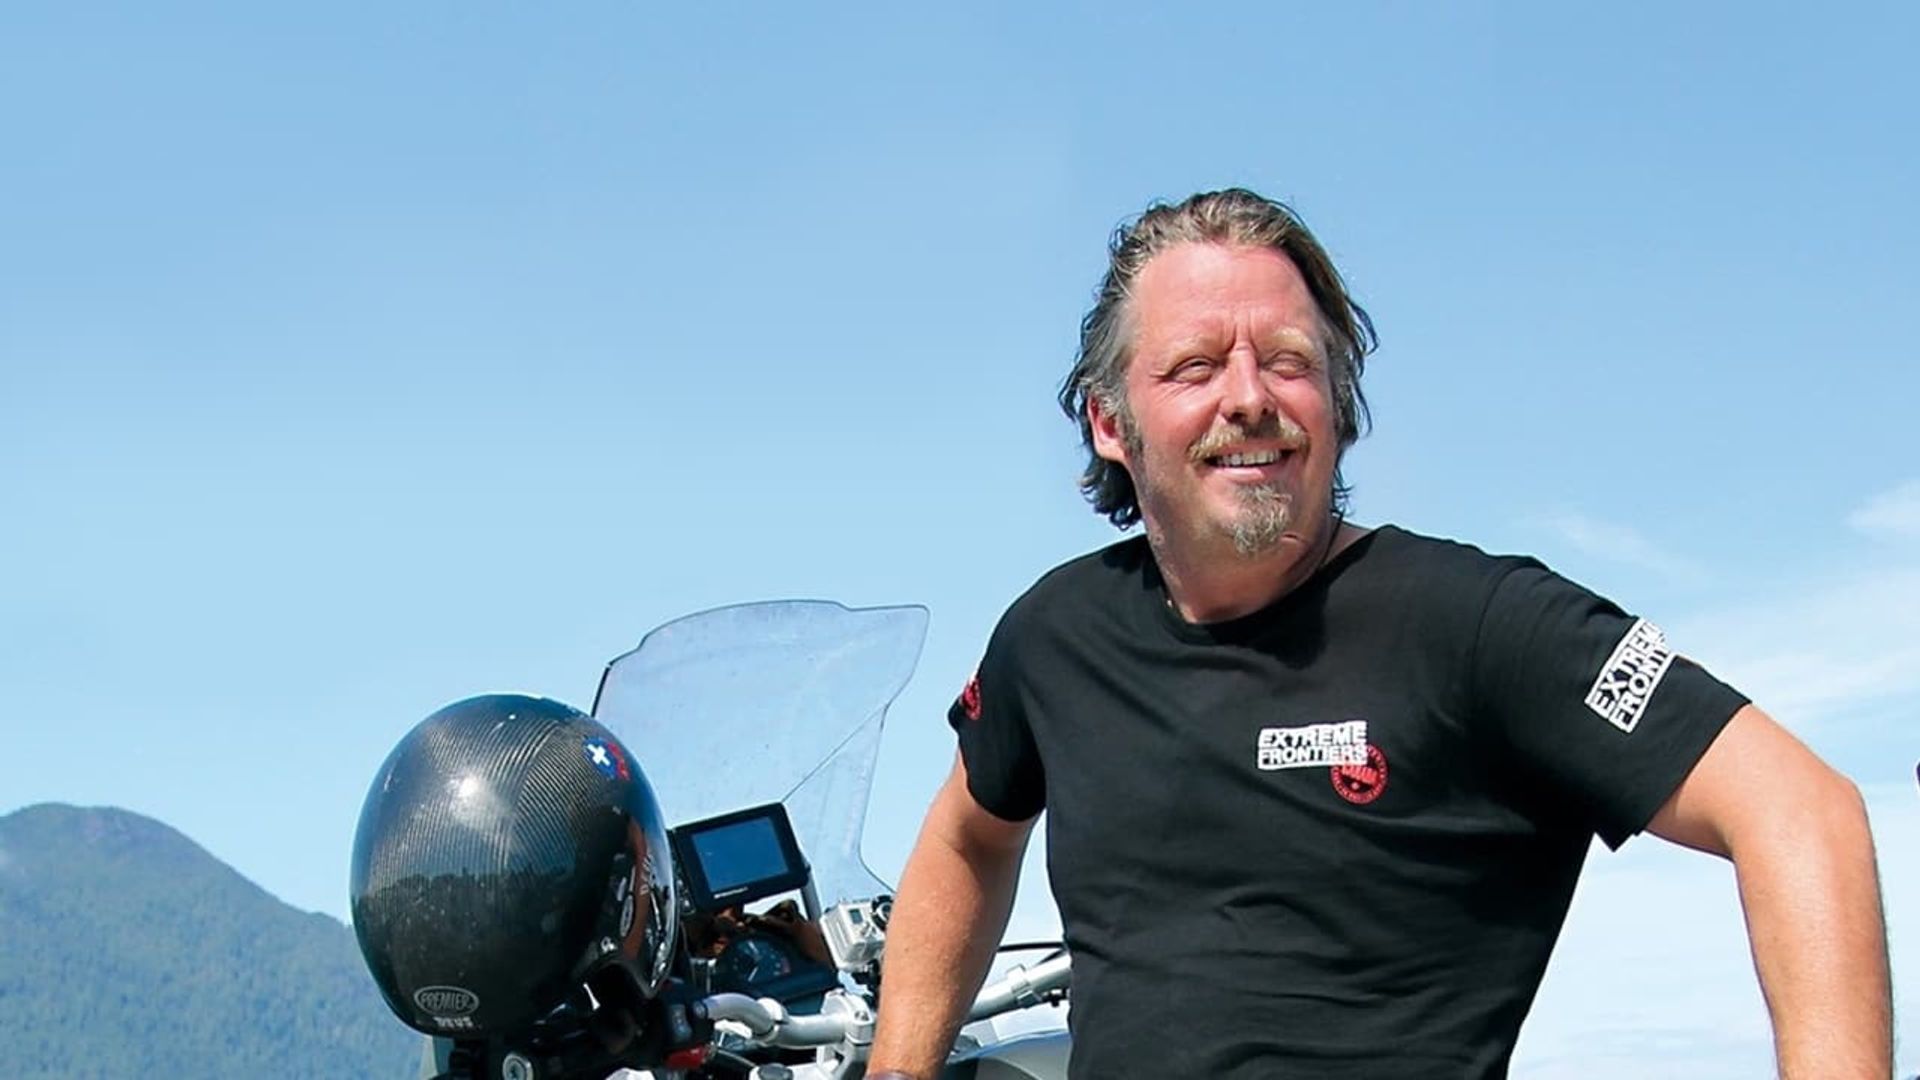 Charley Boorman's Extreme Frontiers background